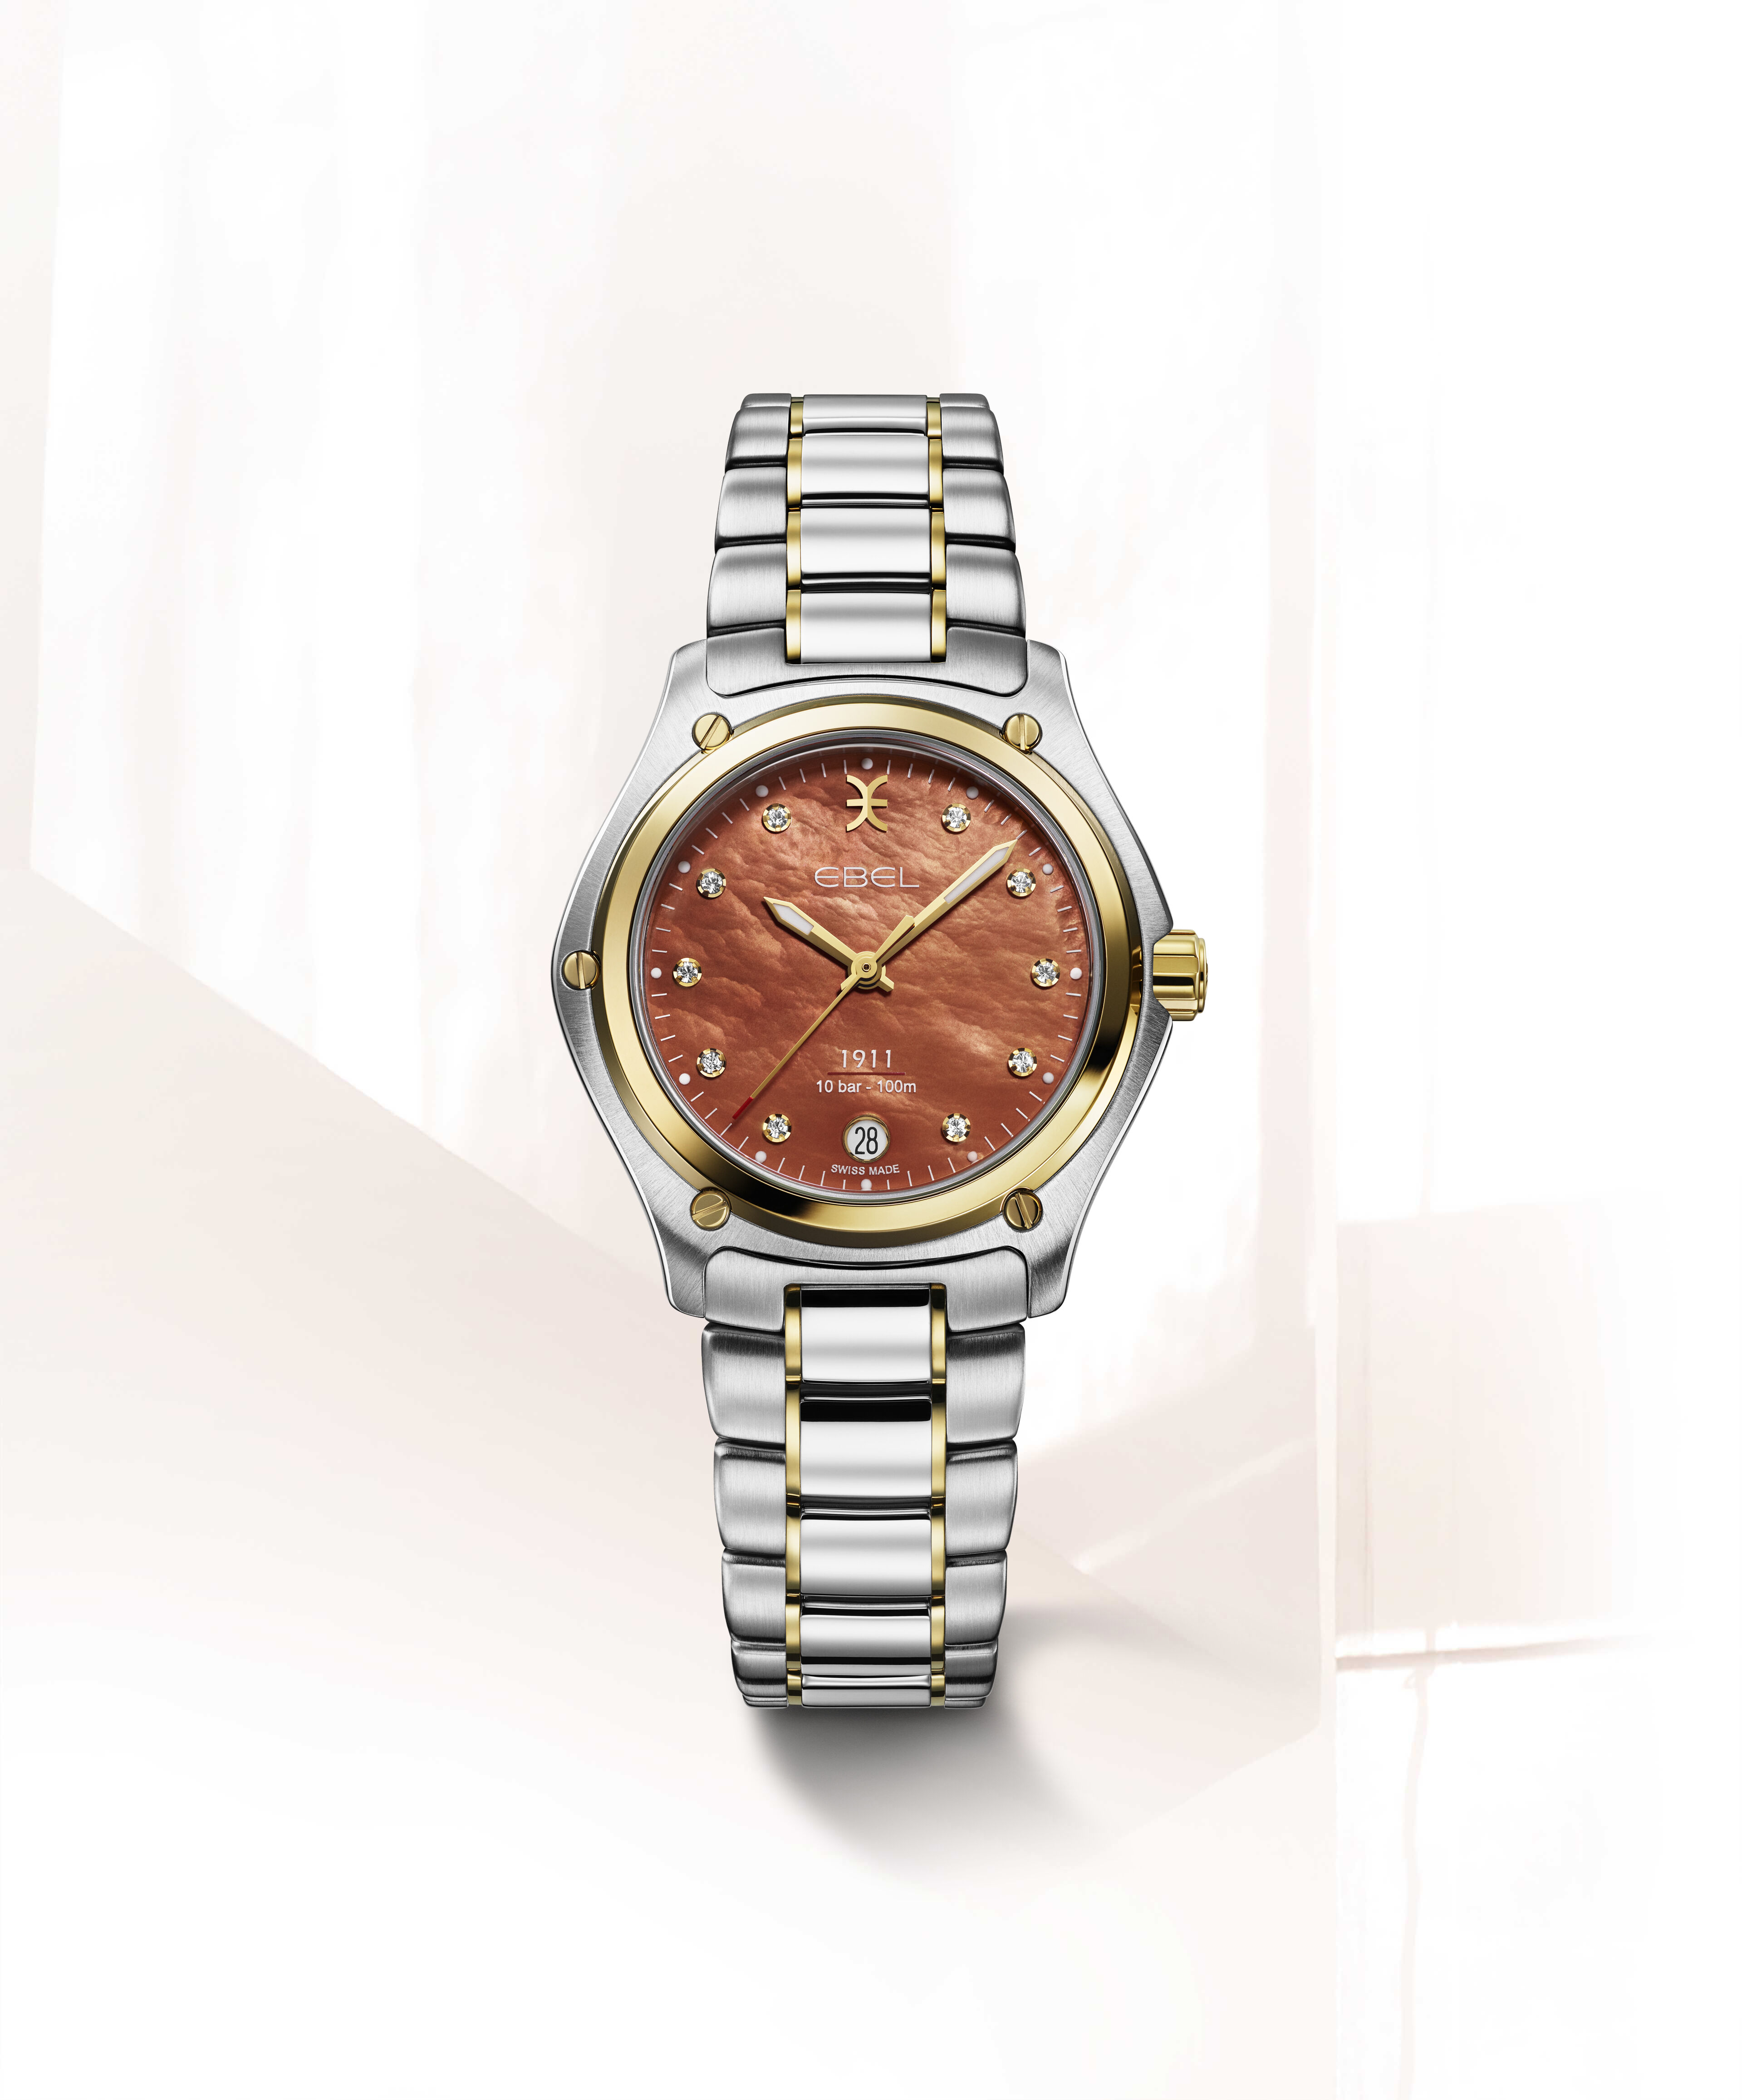 EBEL | Women's Watch EBEL 1911, Stainless steel and 18K yellow gold